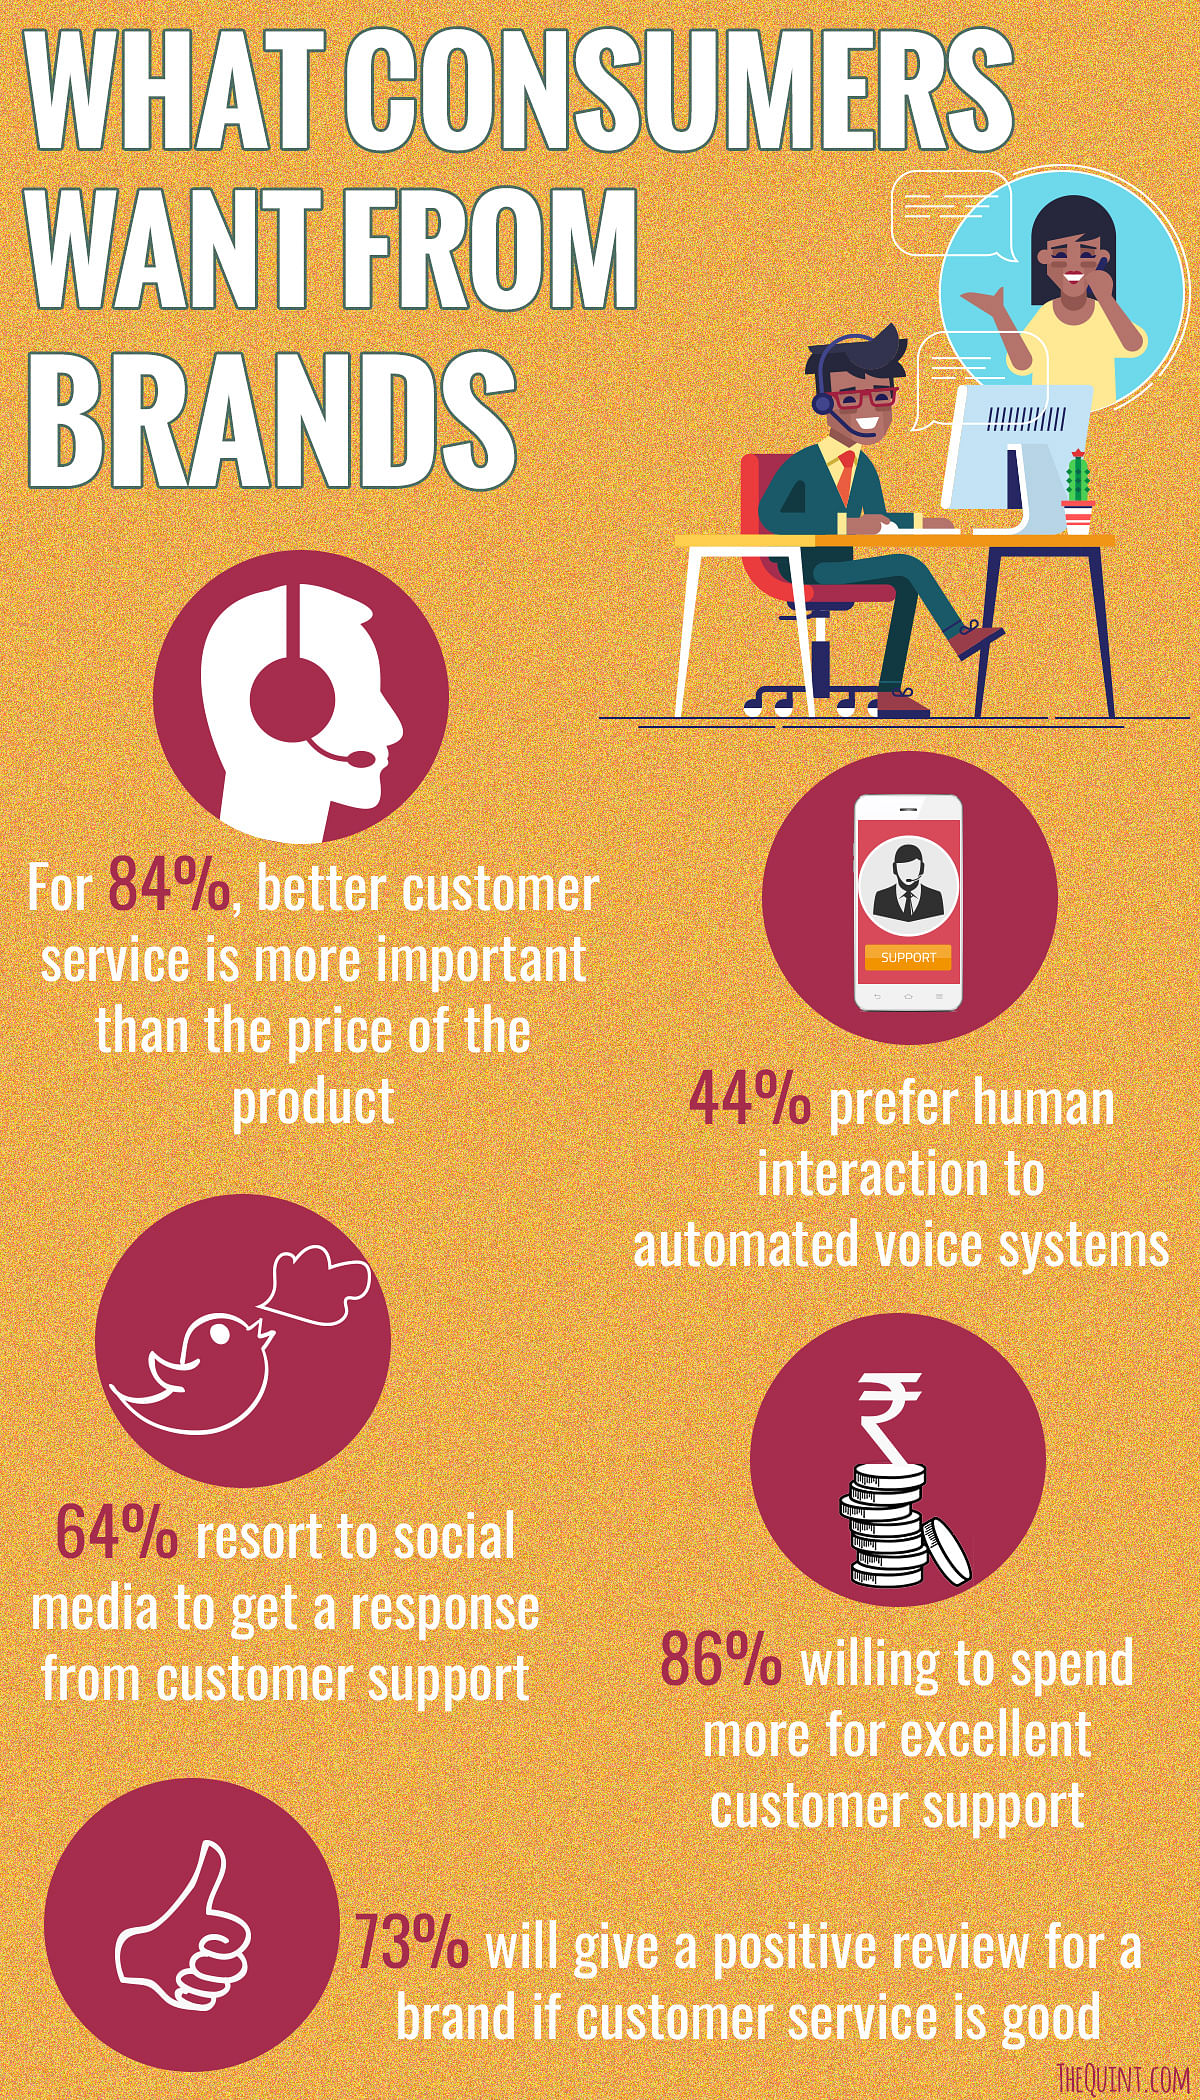 With Indians turning to social media over customer care-related grouses, it’s time brands got their act together.  